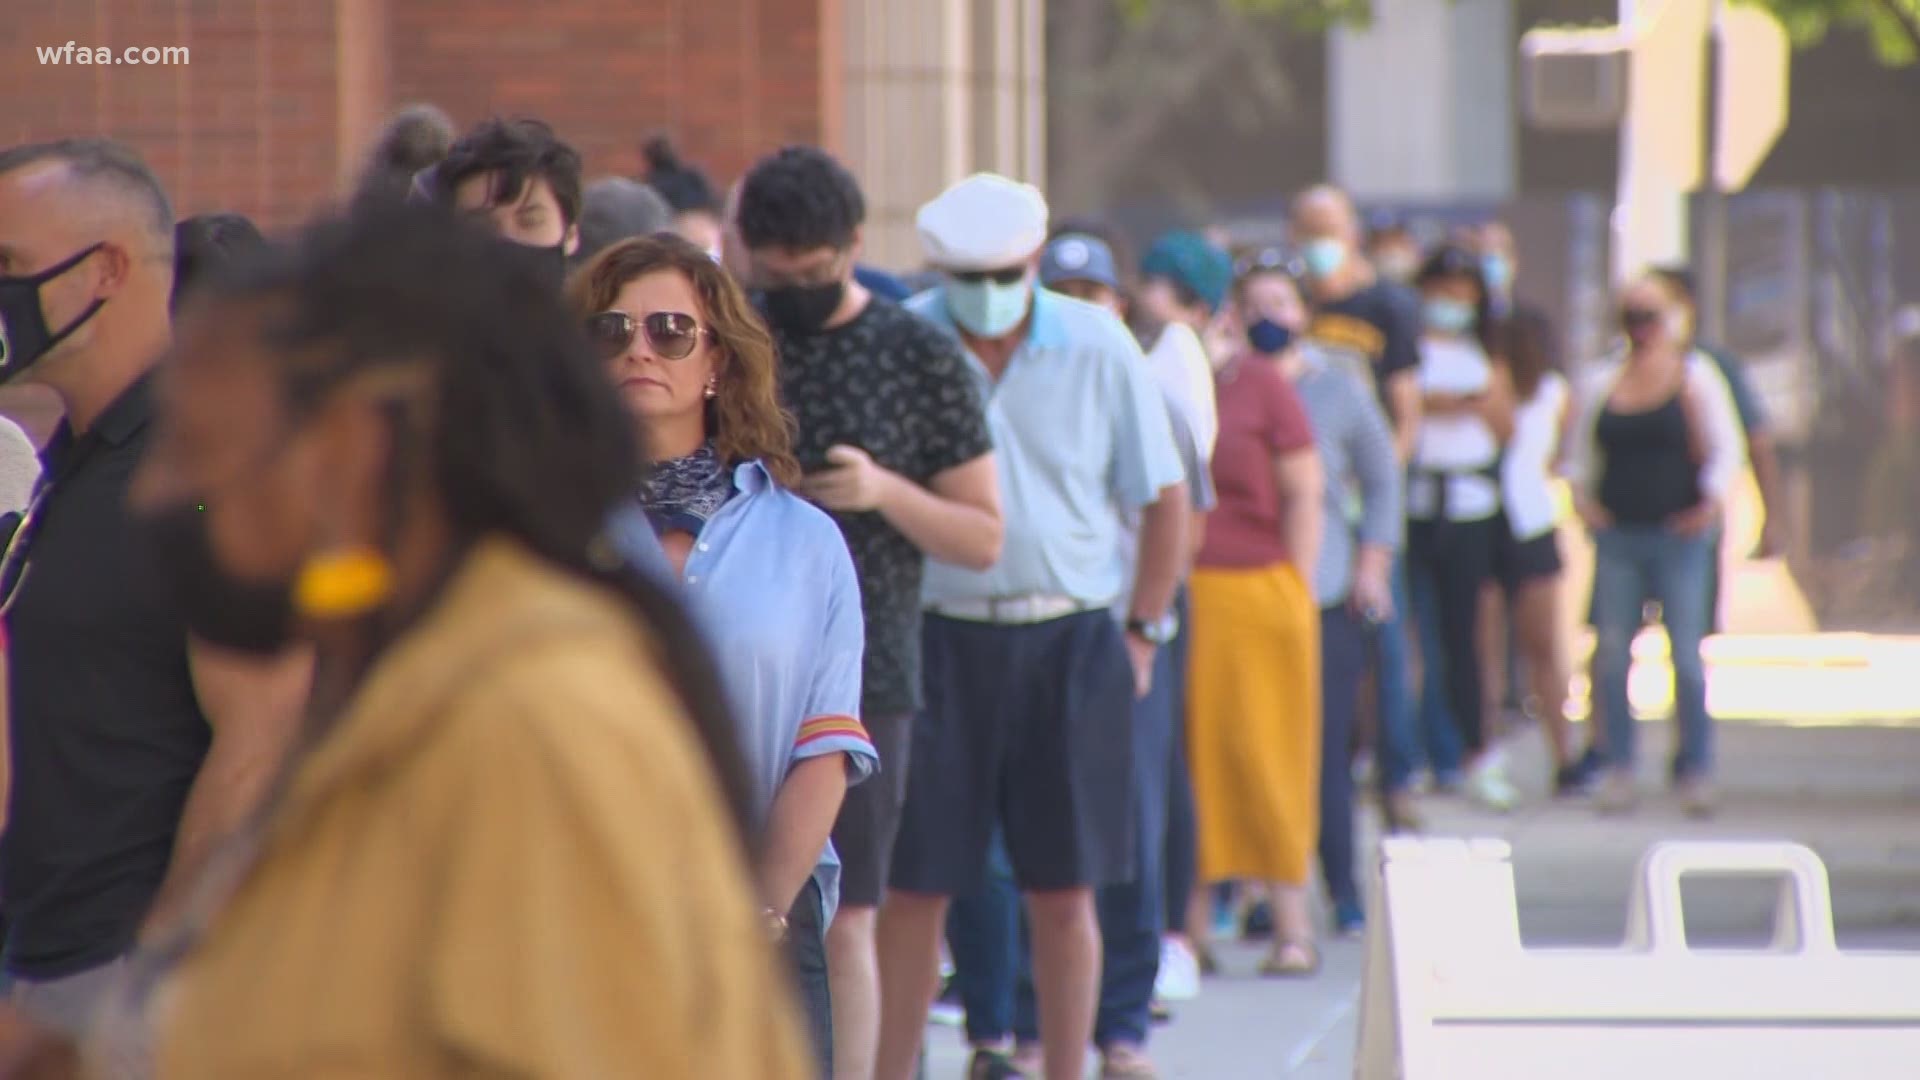 The state is on pace for a record number of voters. A TCU political science professor weighs in on what we know and don't know.